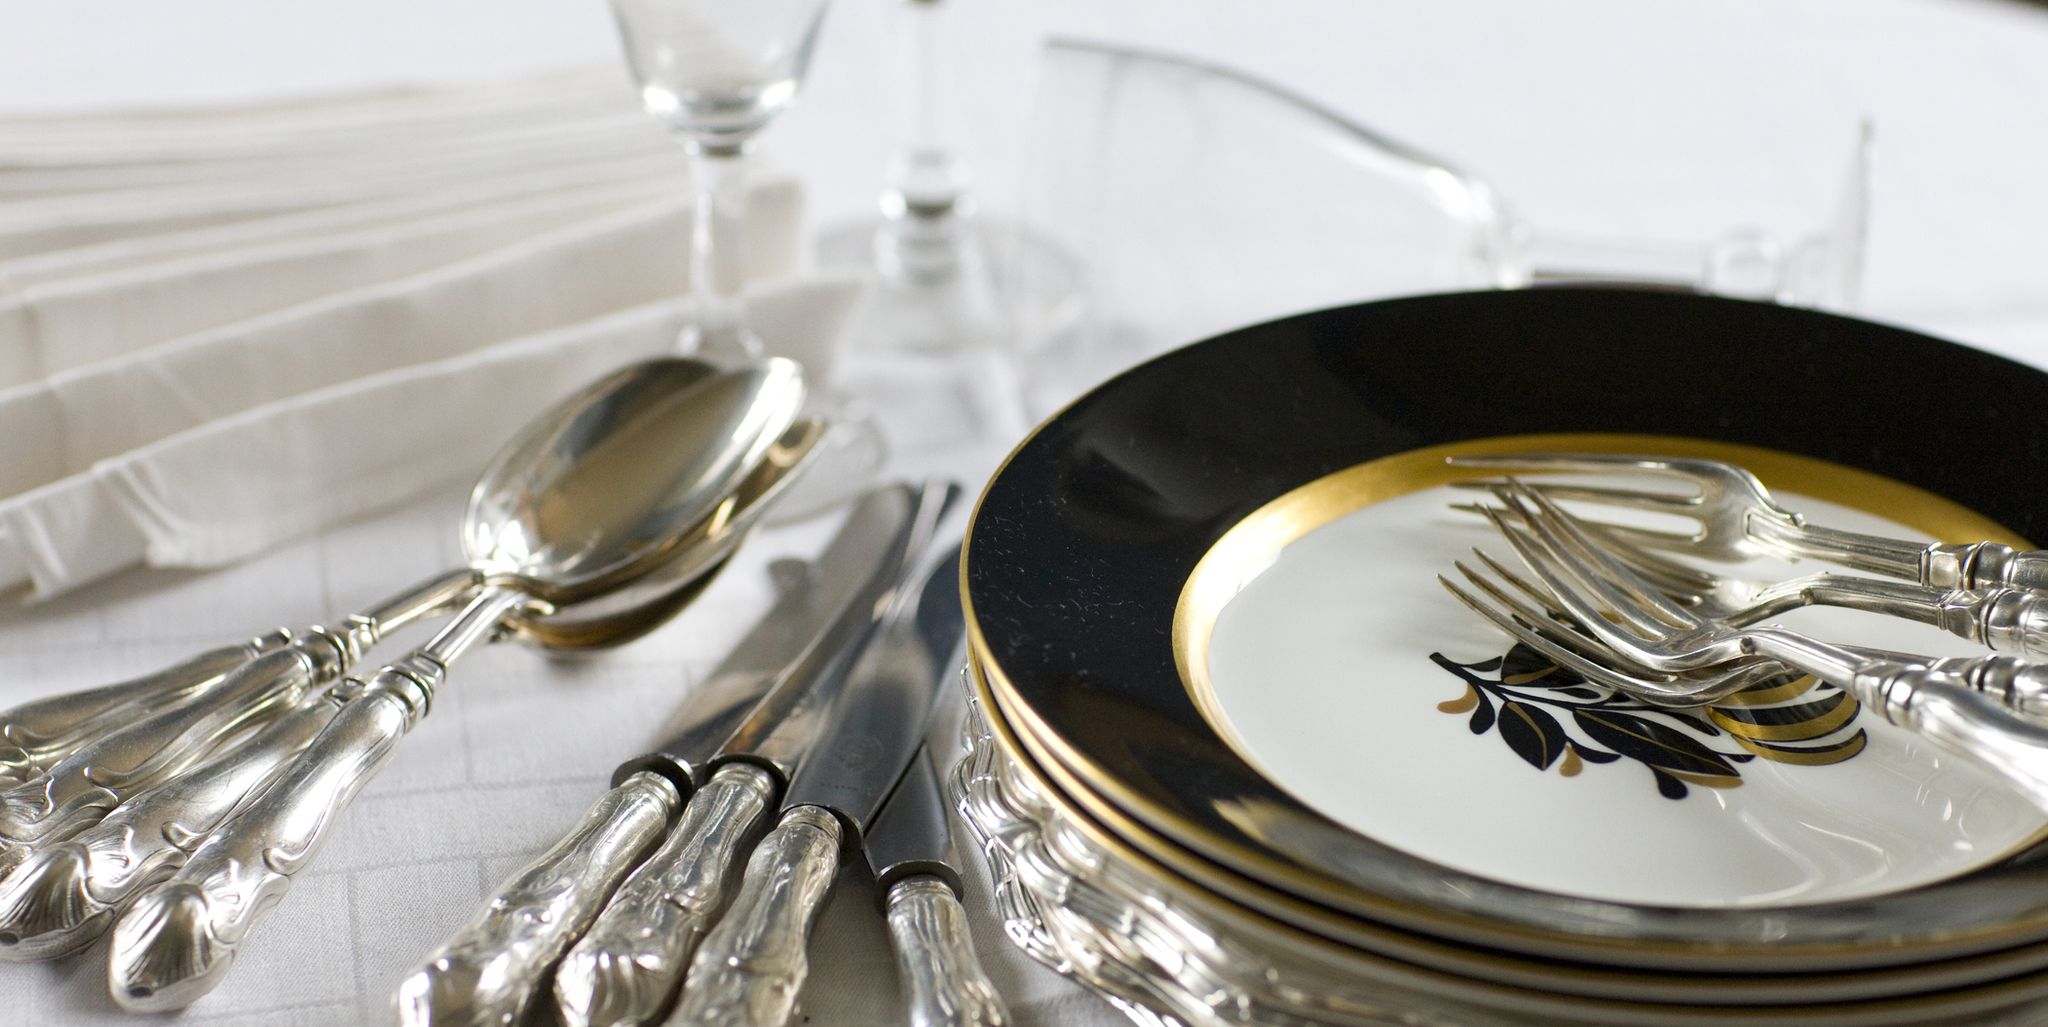 Here's How to Identify Antique and Vintage Silverware, According to Experts